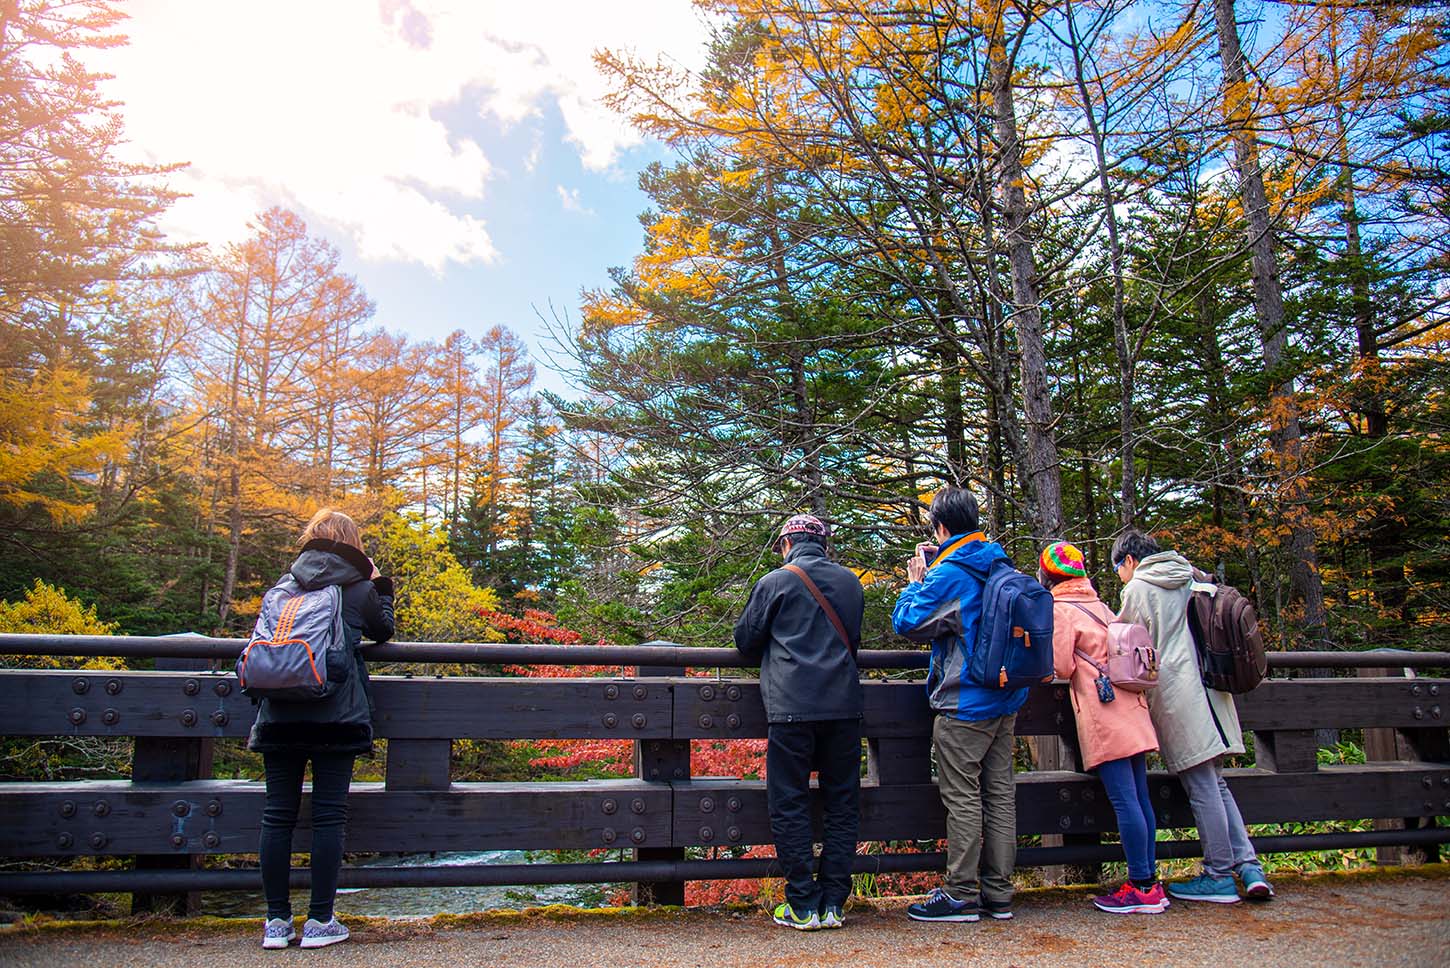 Sightseeing scenery that simply shows the weather in Nagano in October3